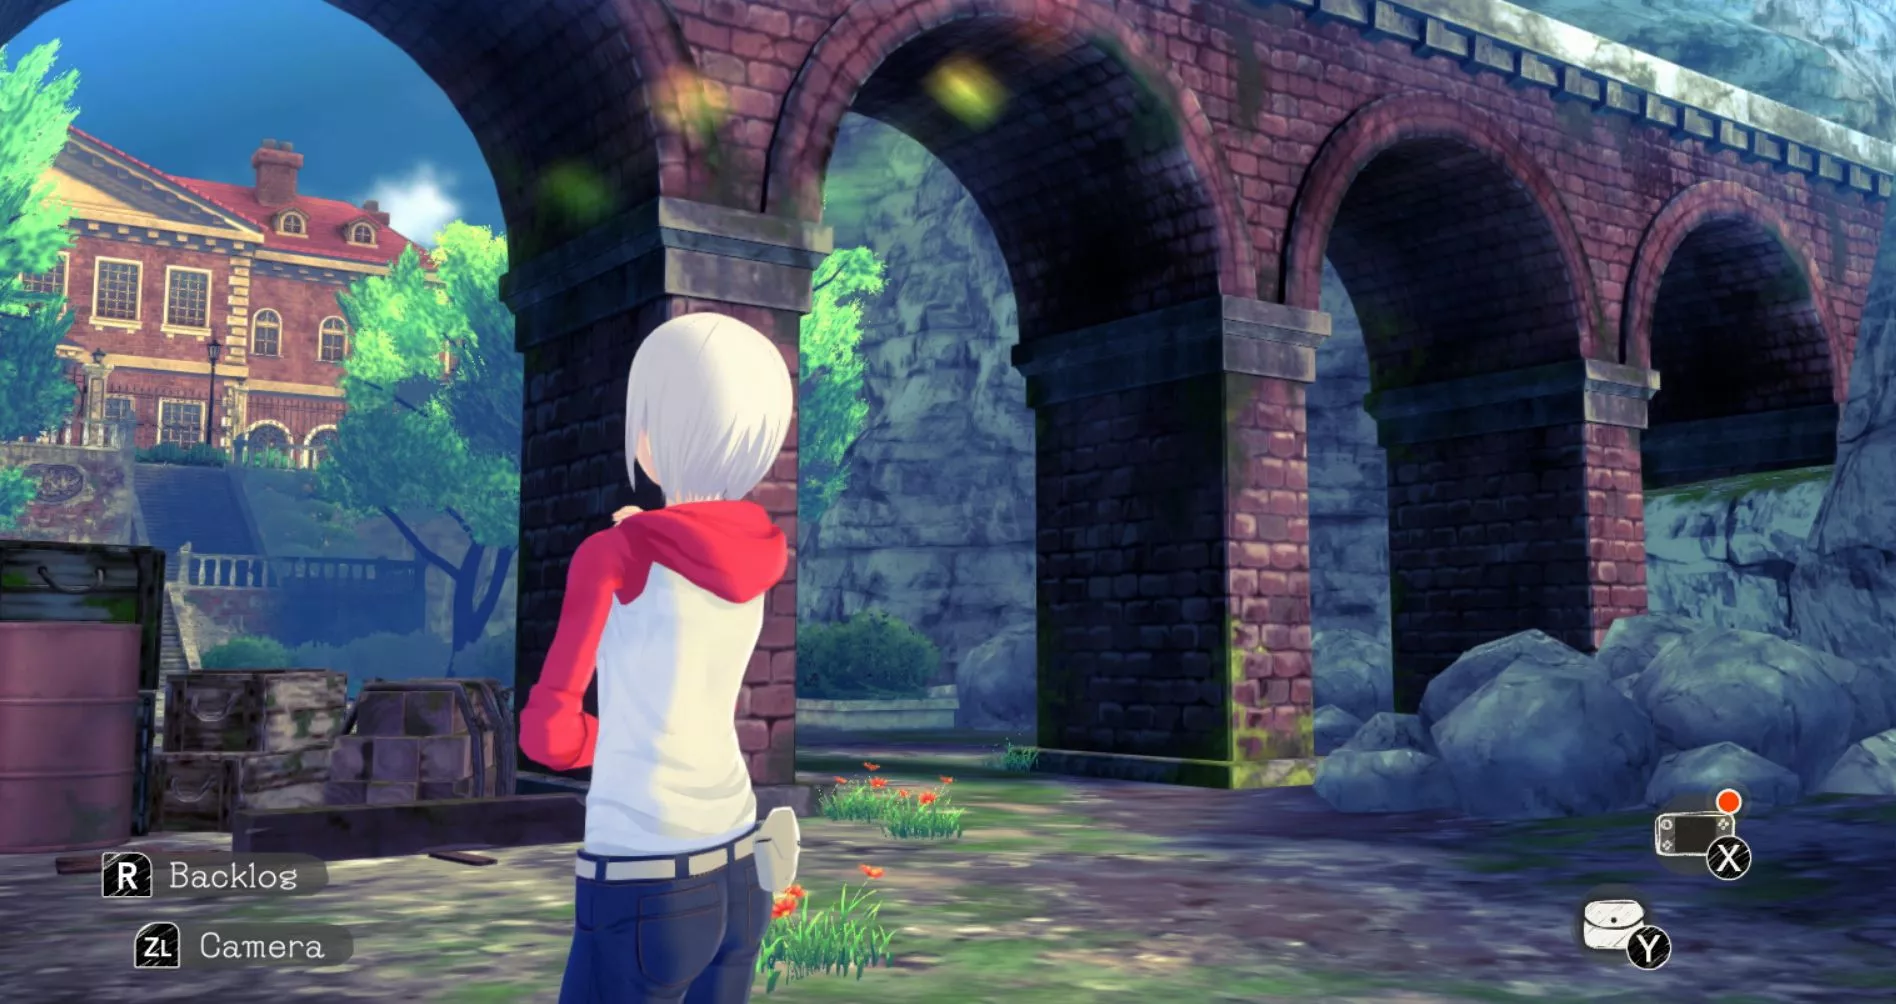 Launch-Trailer zu Another Code: Recollection Heropic